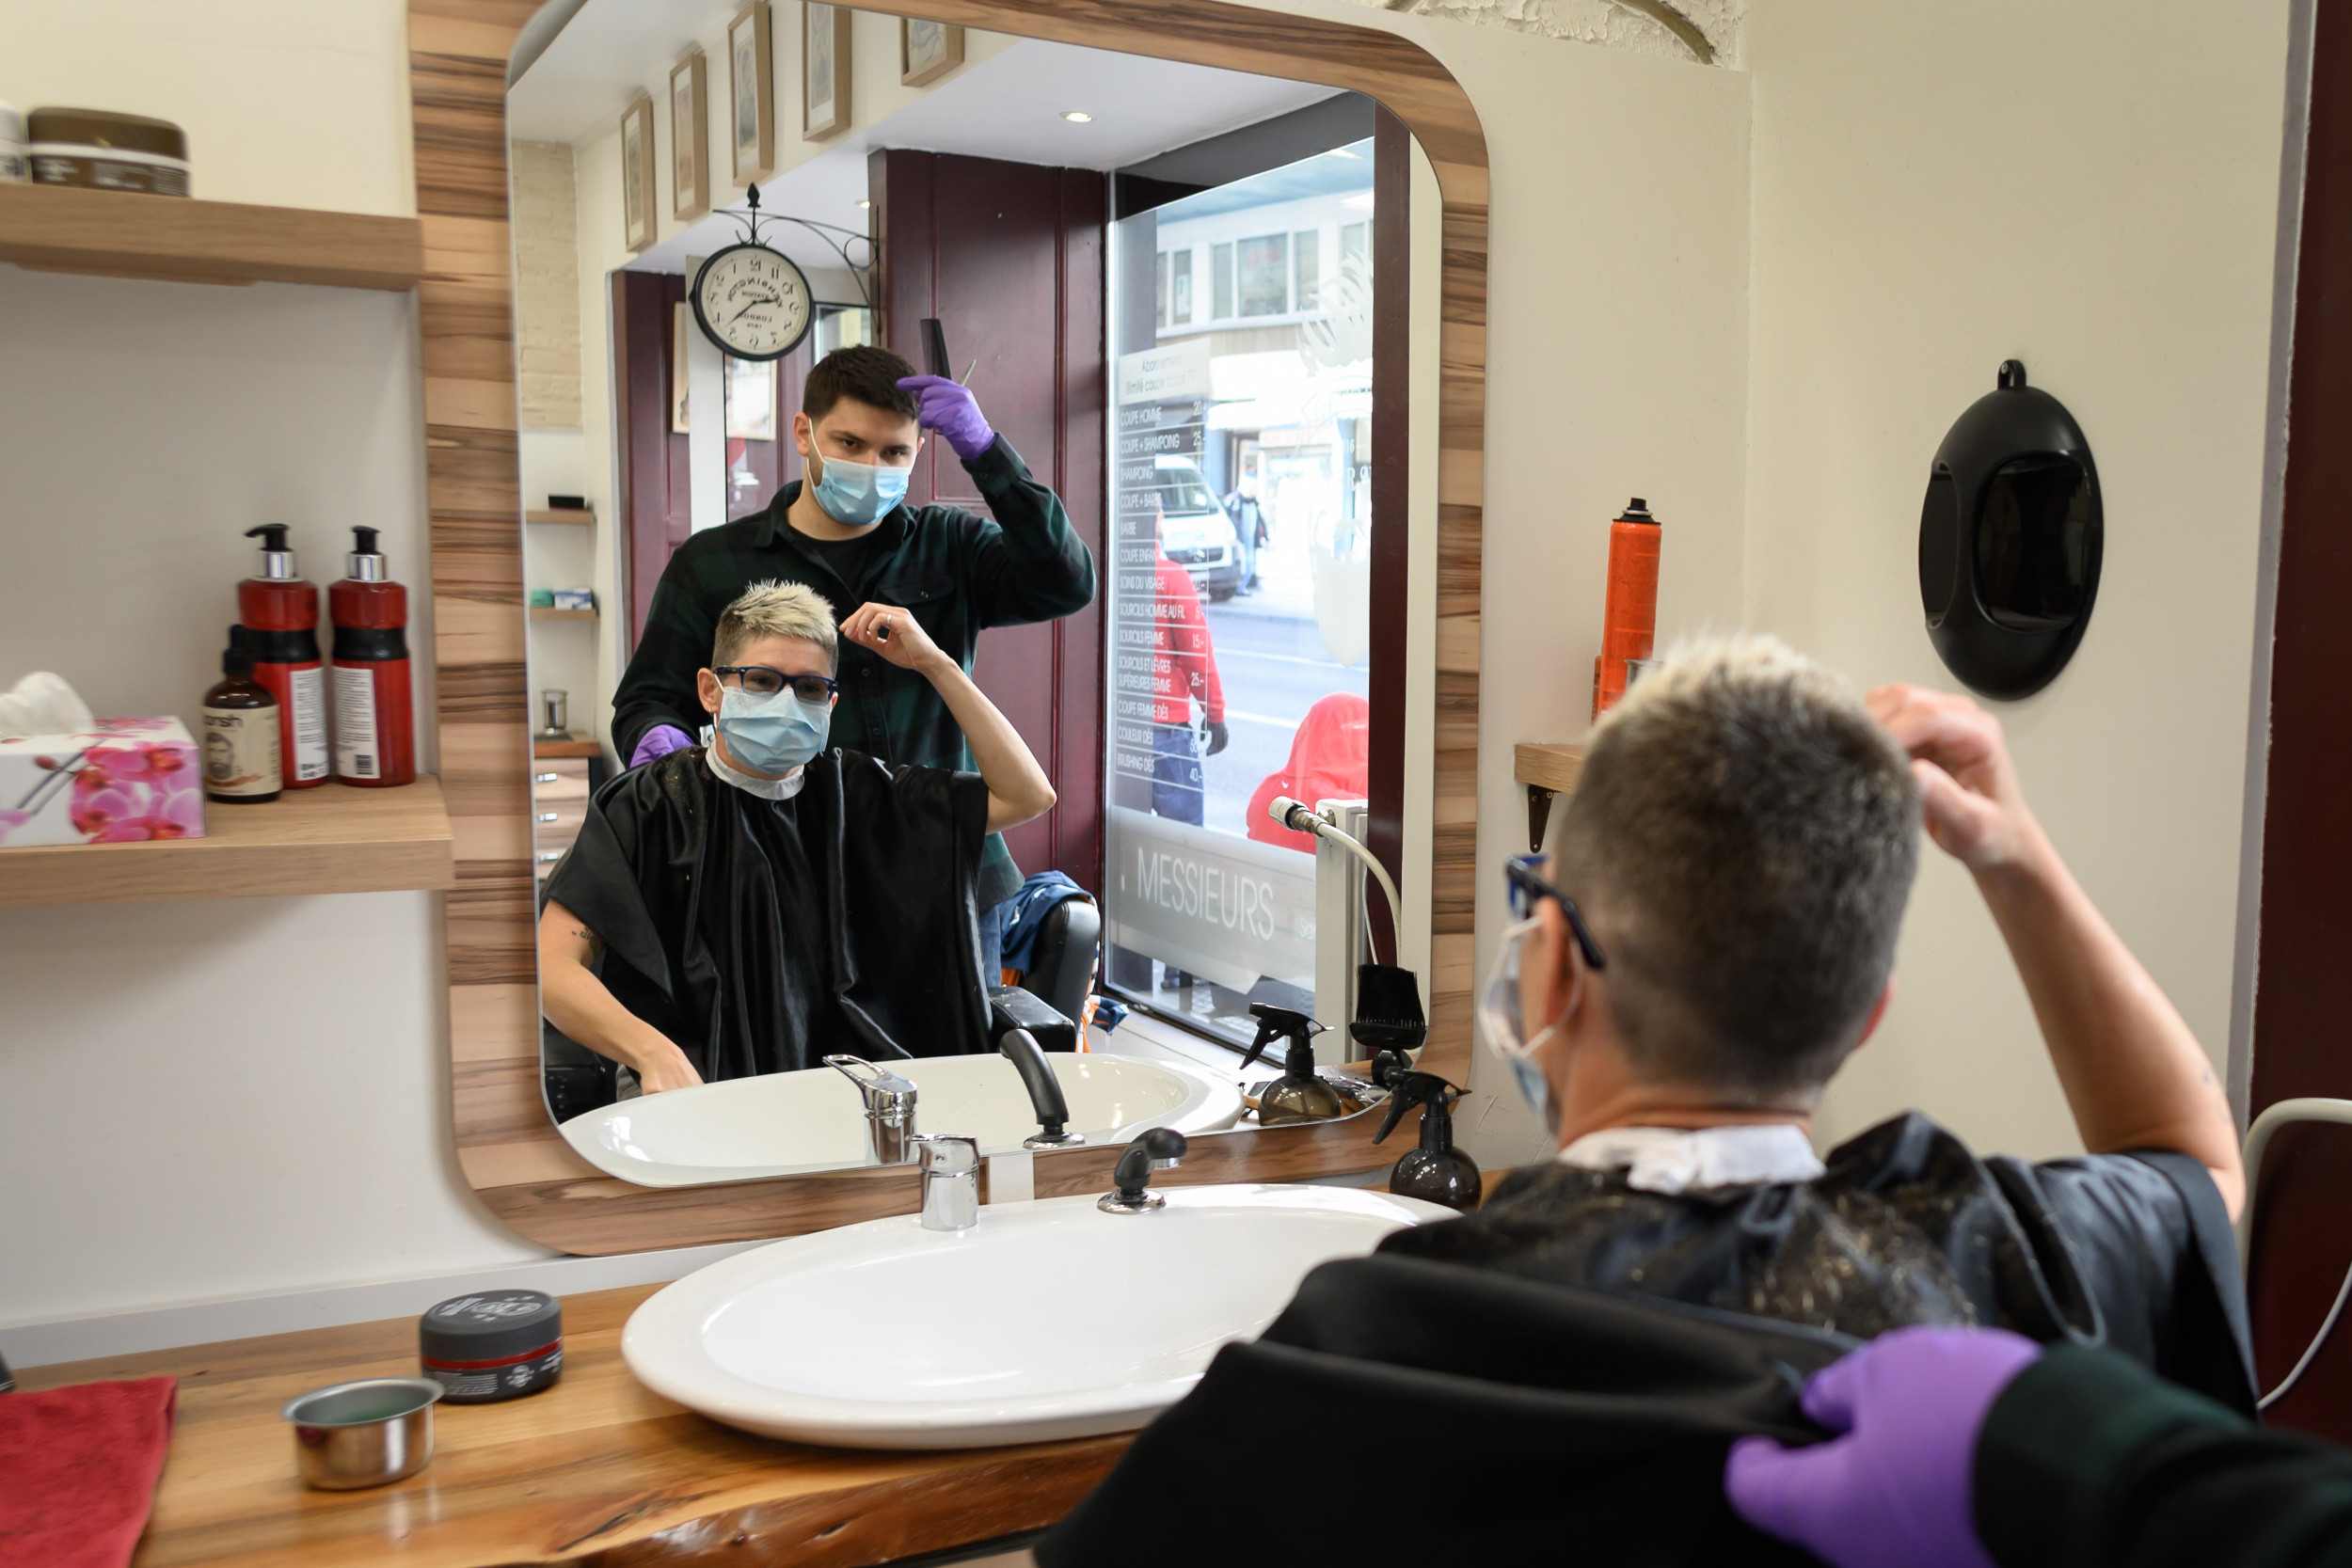 When Will . Hairdressers and Salons Re-open?